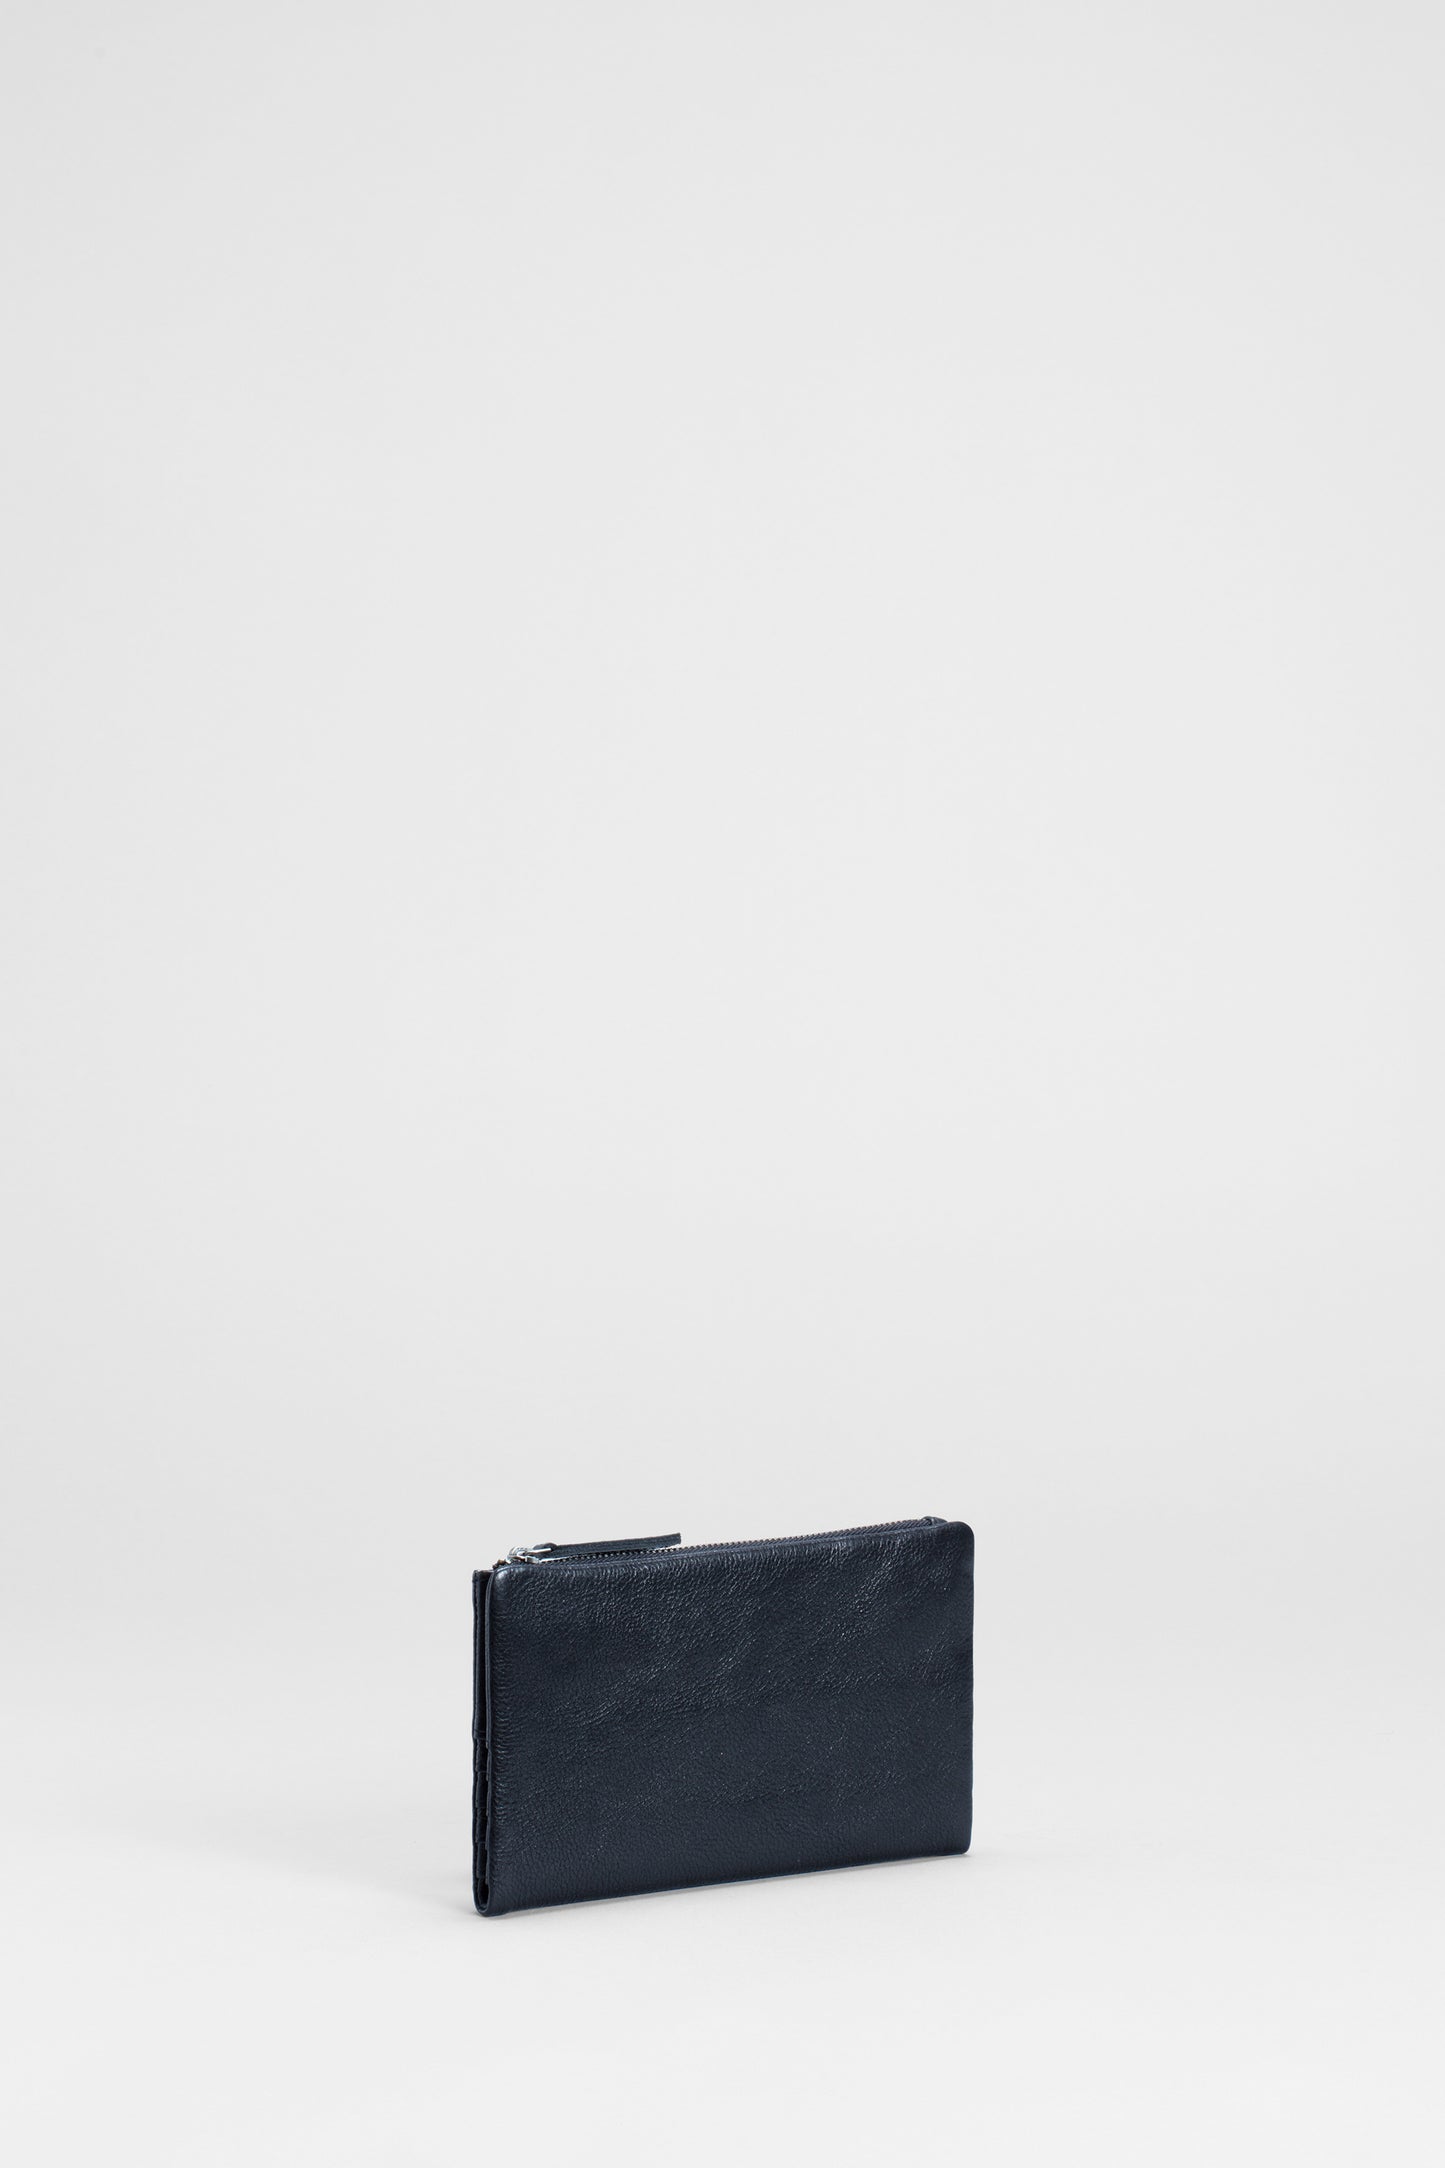 Hanna Simple Leather Zip Up Wallet Front | Black